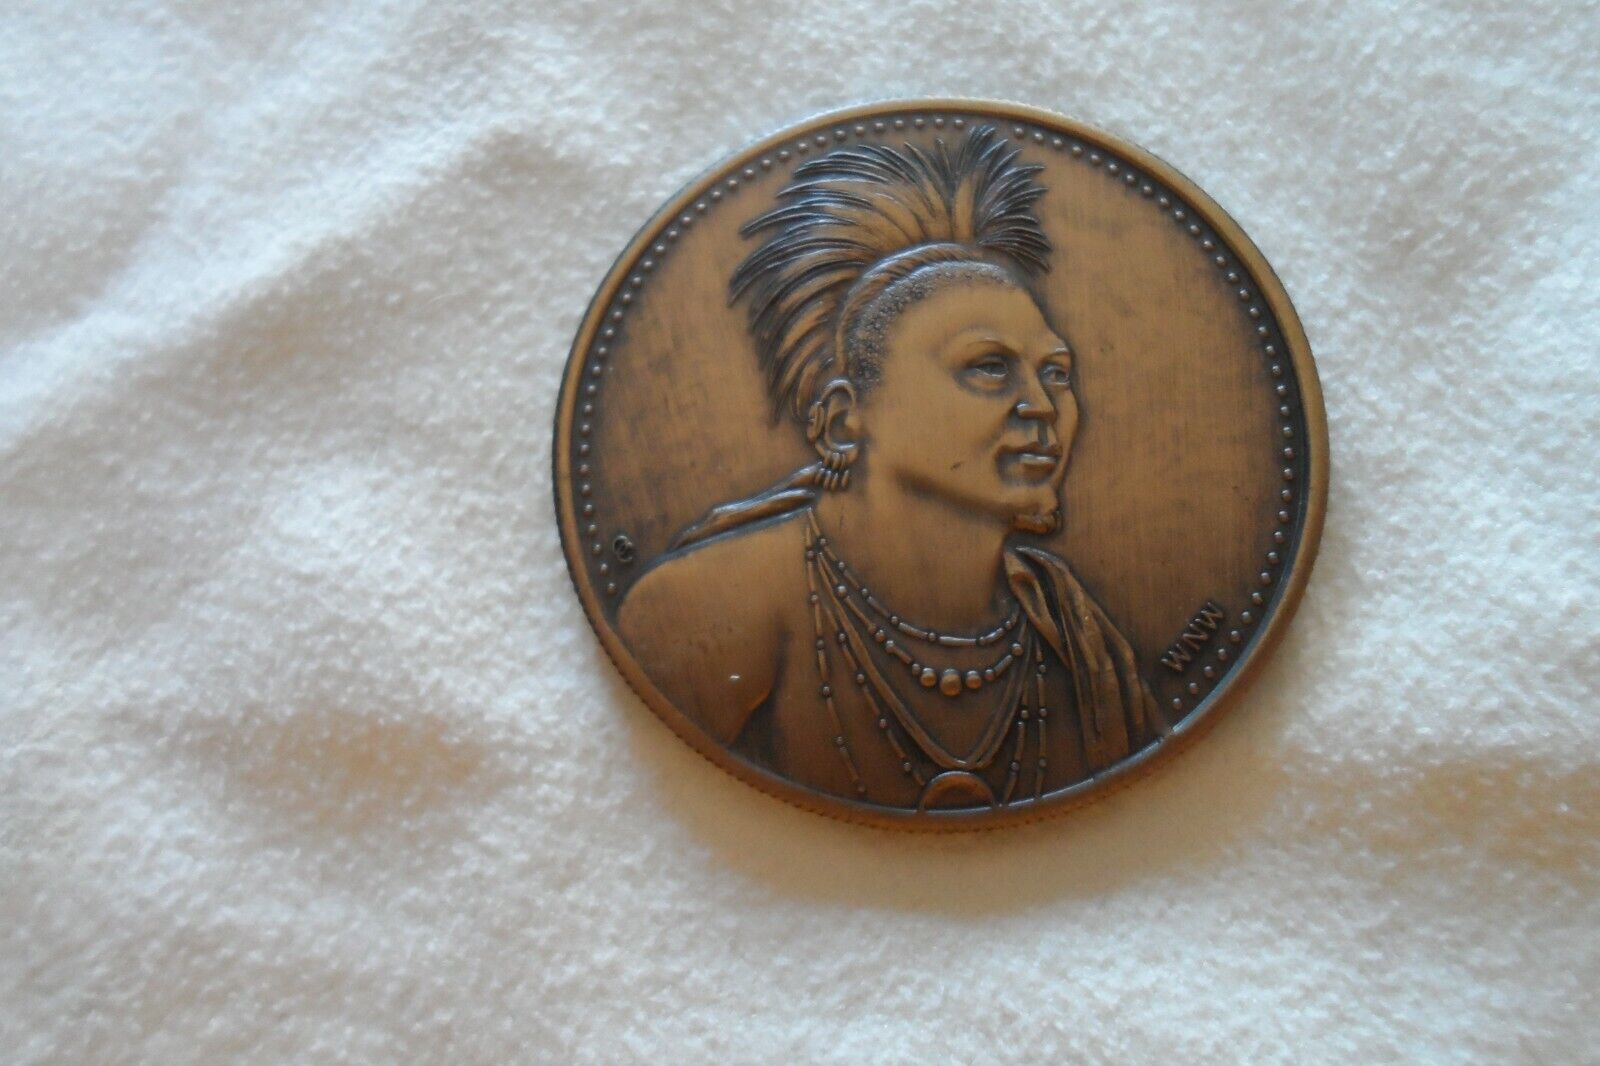 VERY UNIQUE AND GORGEOUS 3 COIN NATIVE AMERICAN SET OSAGE AND SIOUX Без бренда - фотография #2